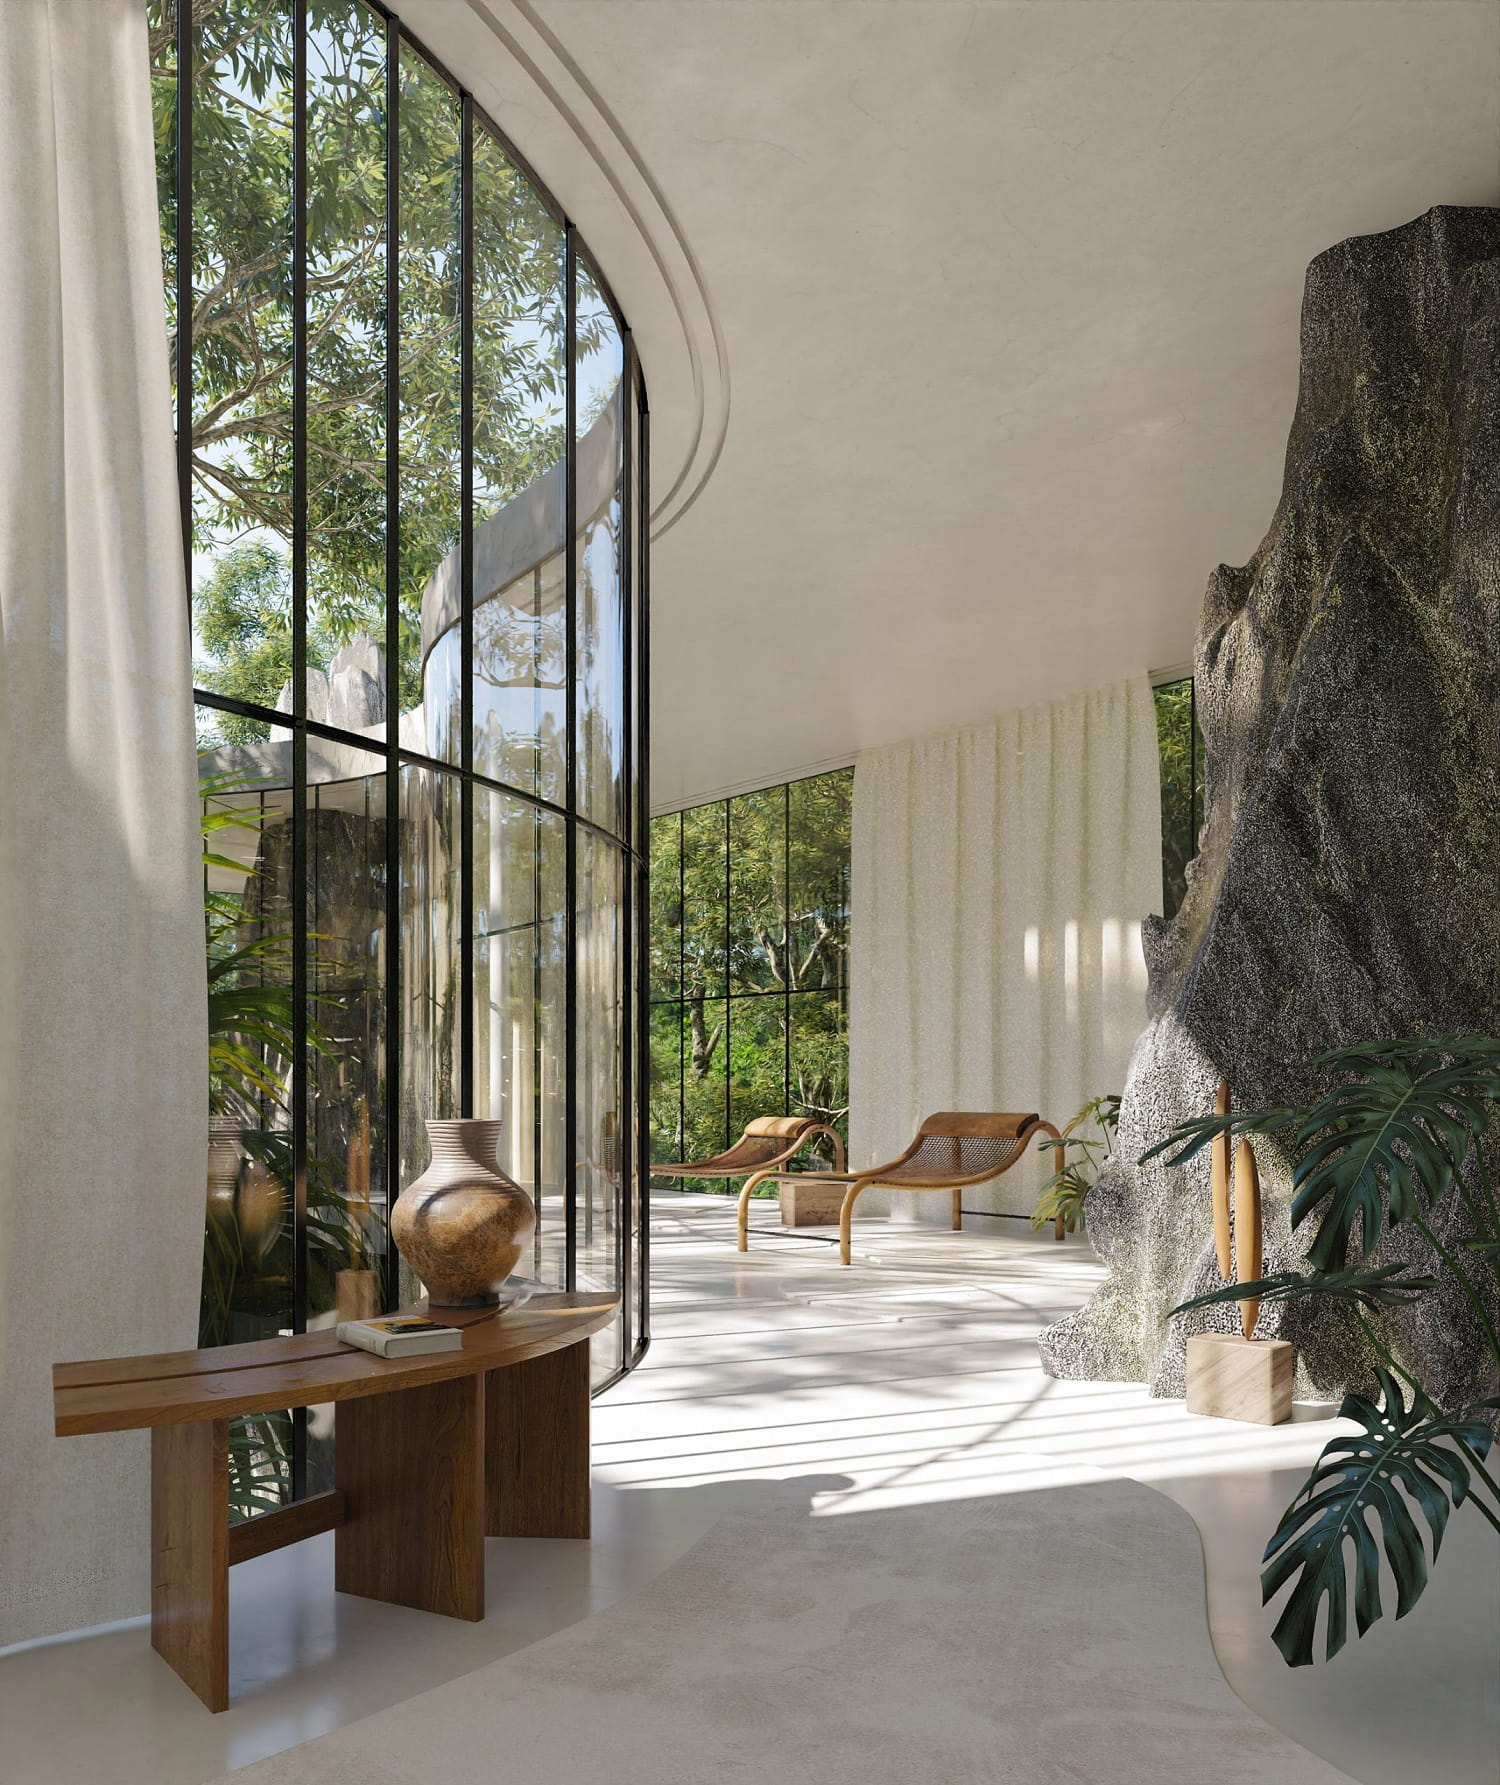 The Imaginary Modernist Home in the Jungles of Brazil